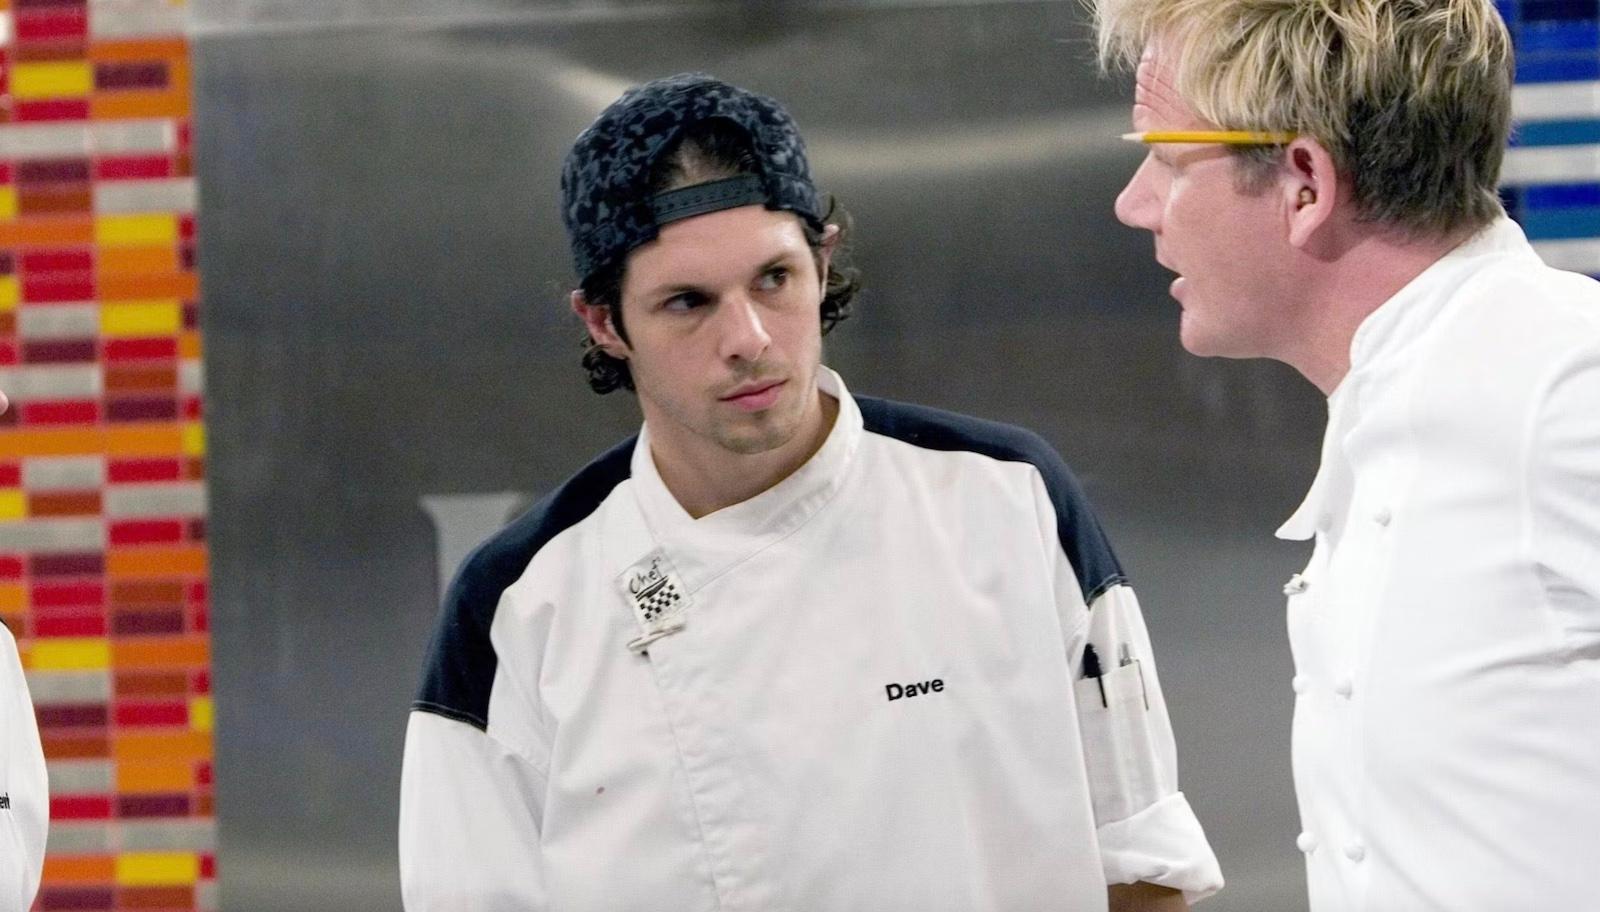 Is Hell's Kitchen staged? Scripted rumors answered - Dexerto